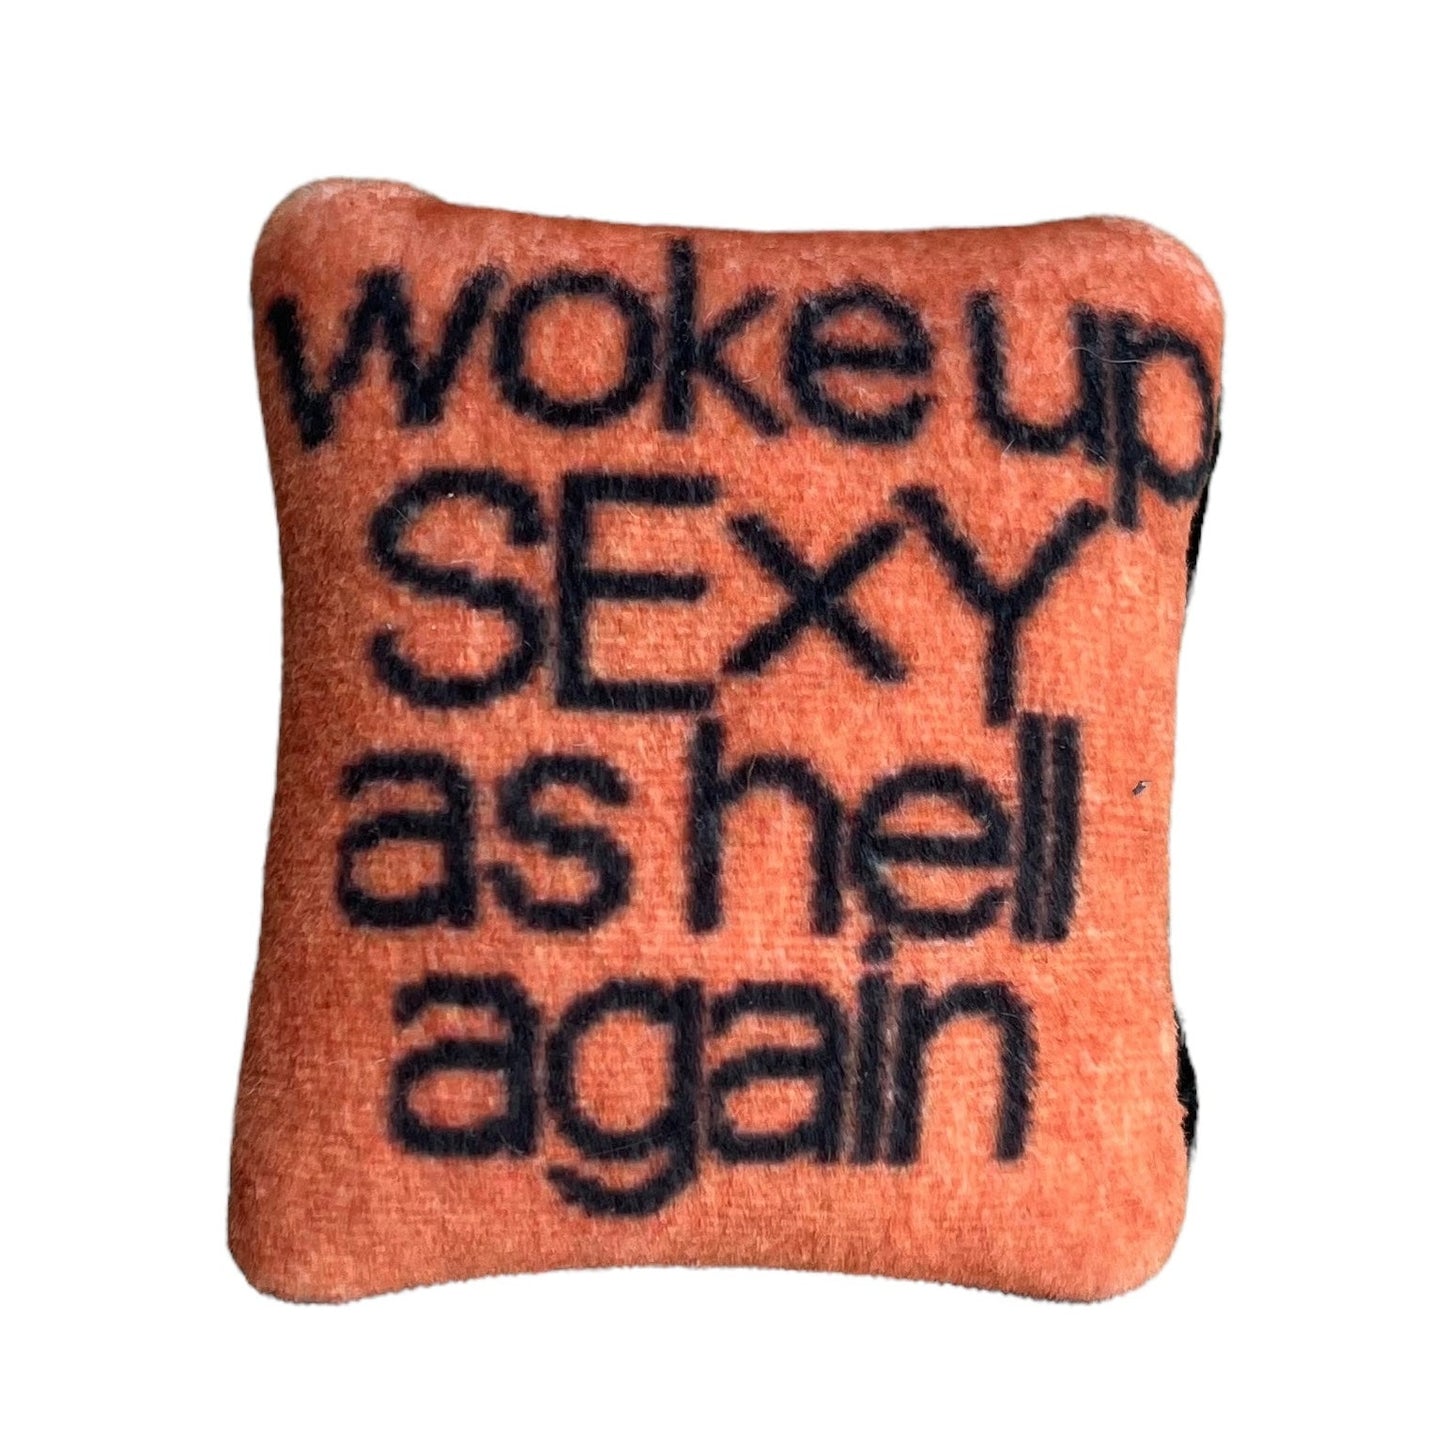 woke up sexy as hell again centered on pillow in black text with copper background